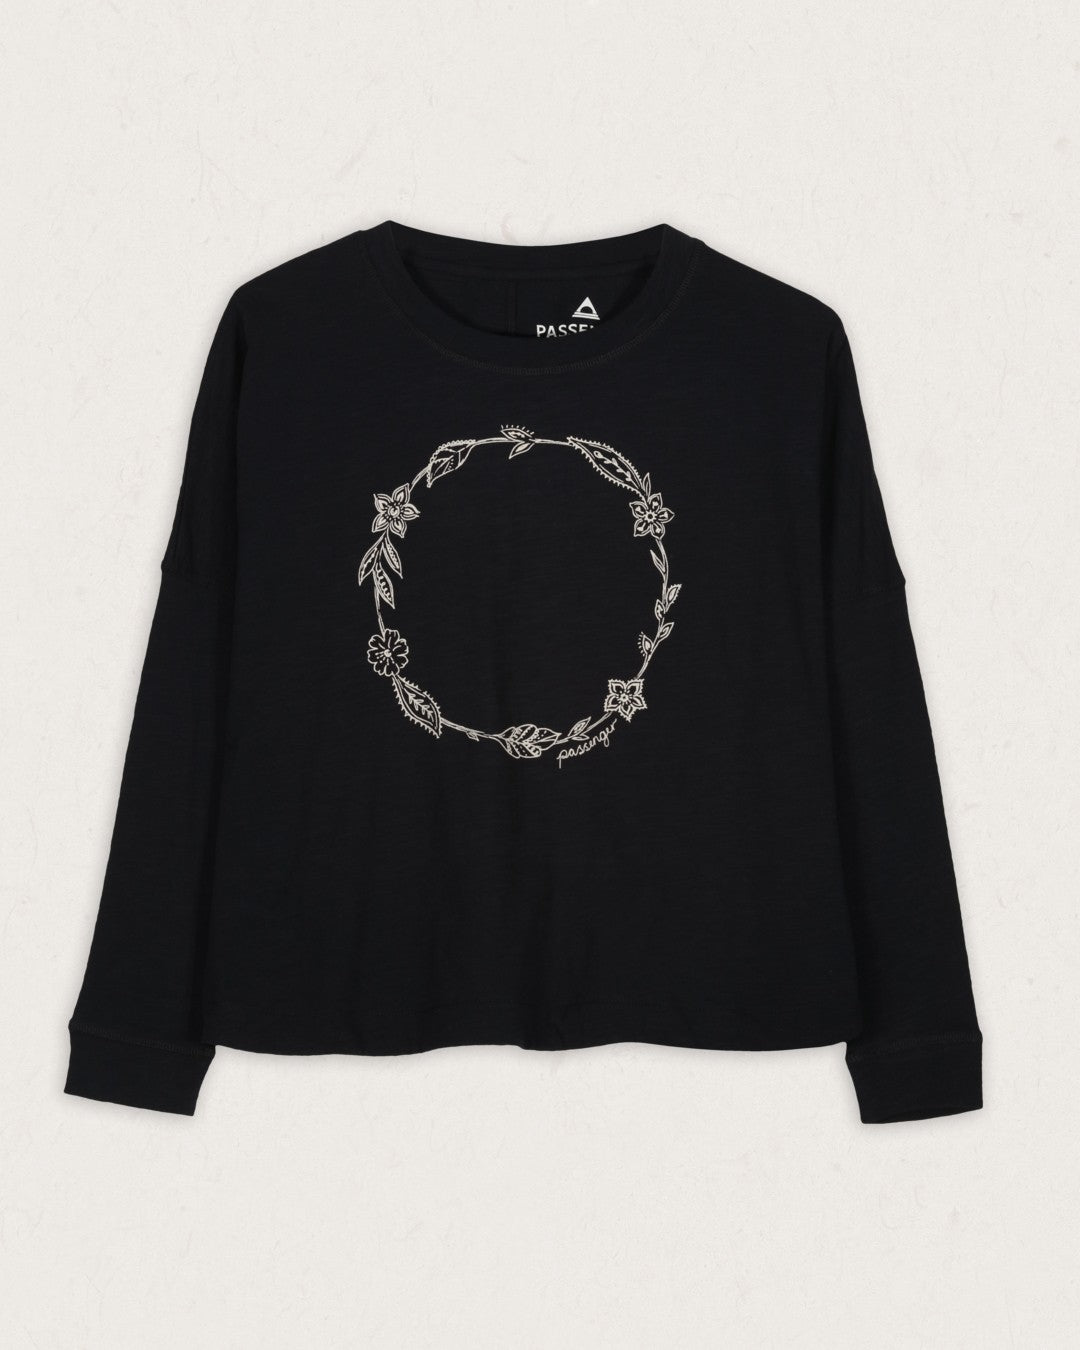 Daisy Chain Recycled Cotton Ls T-Shirt - Black